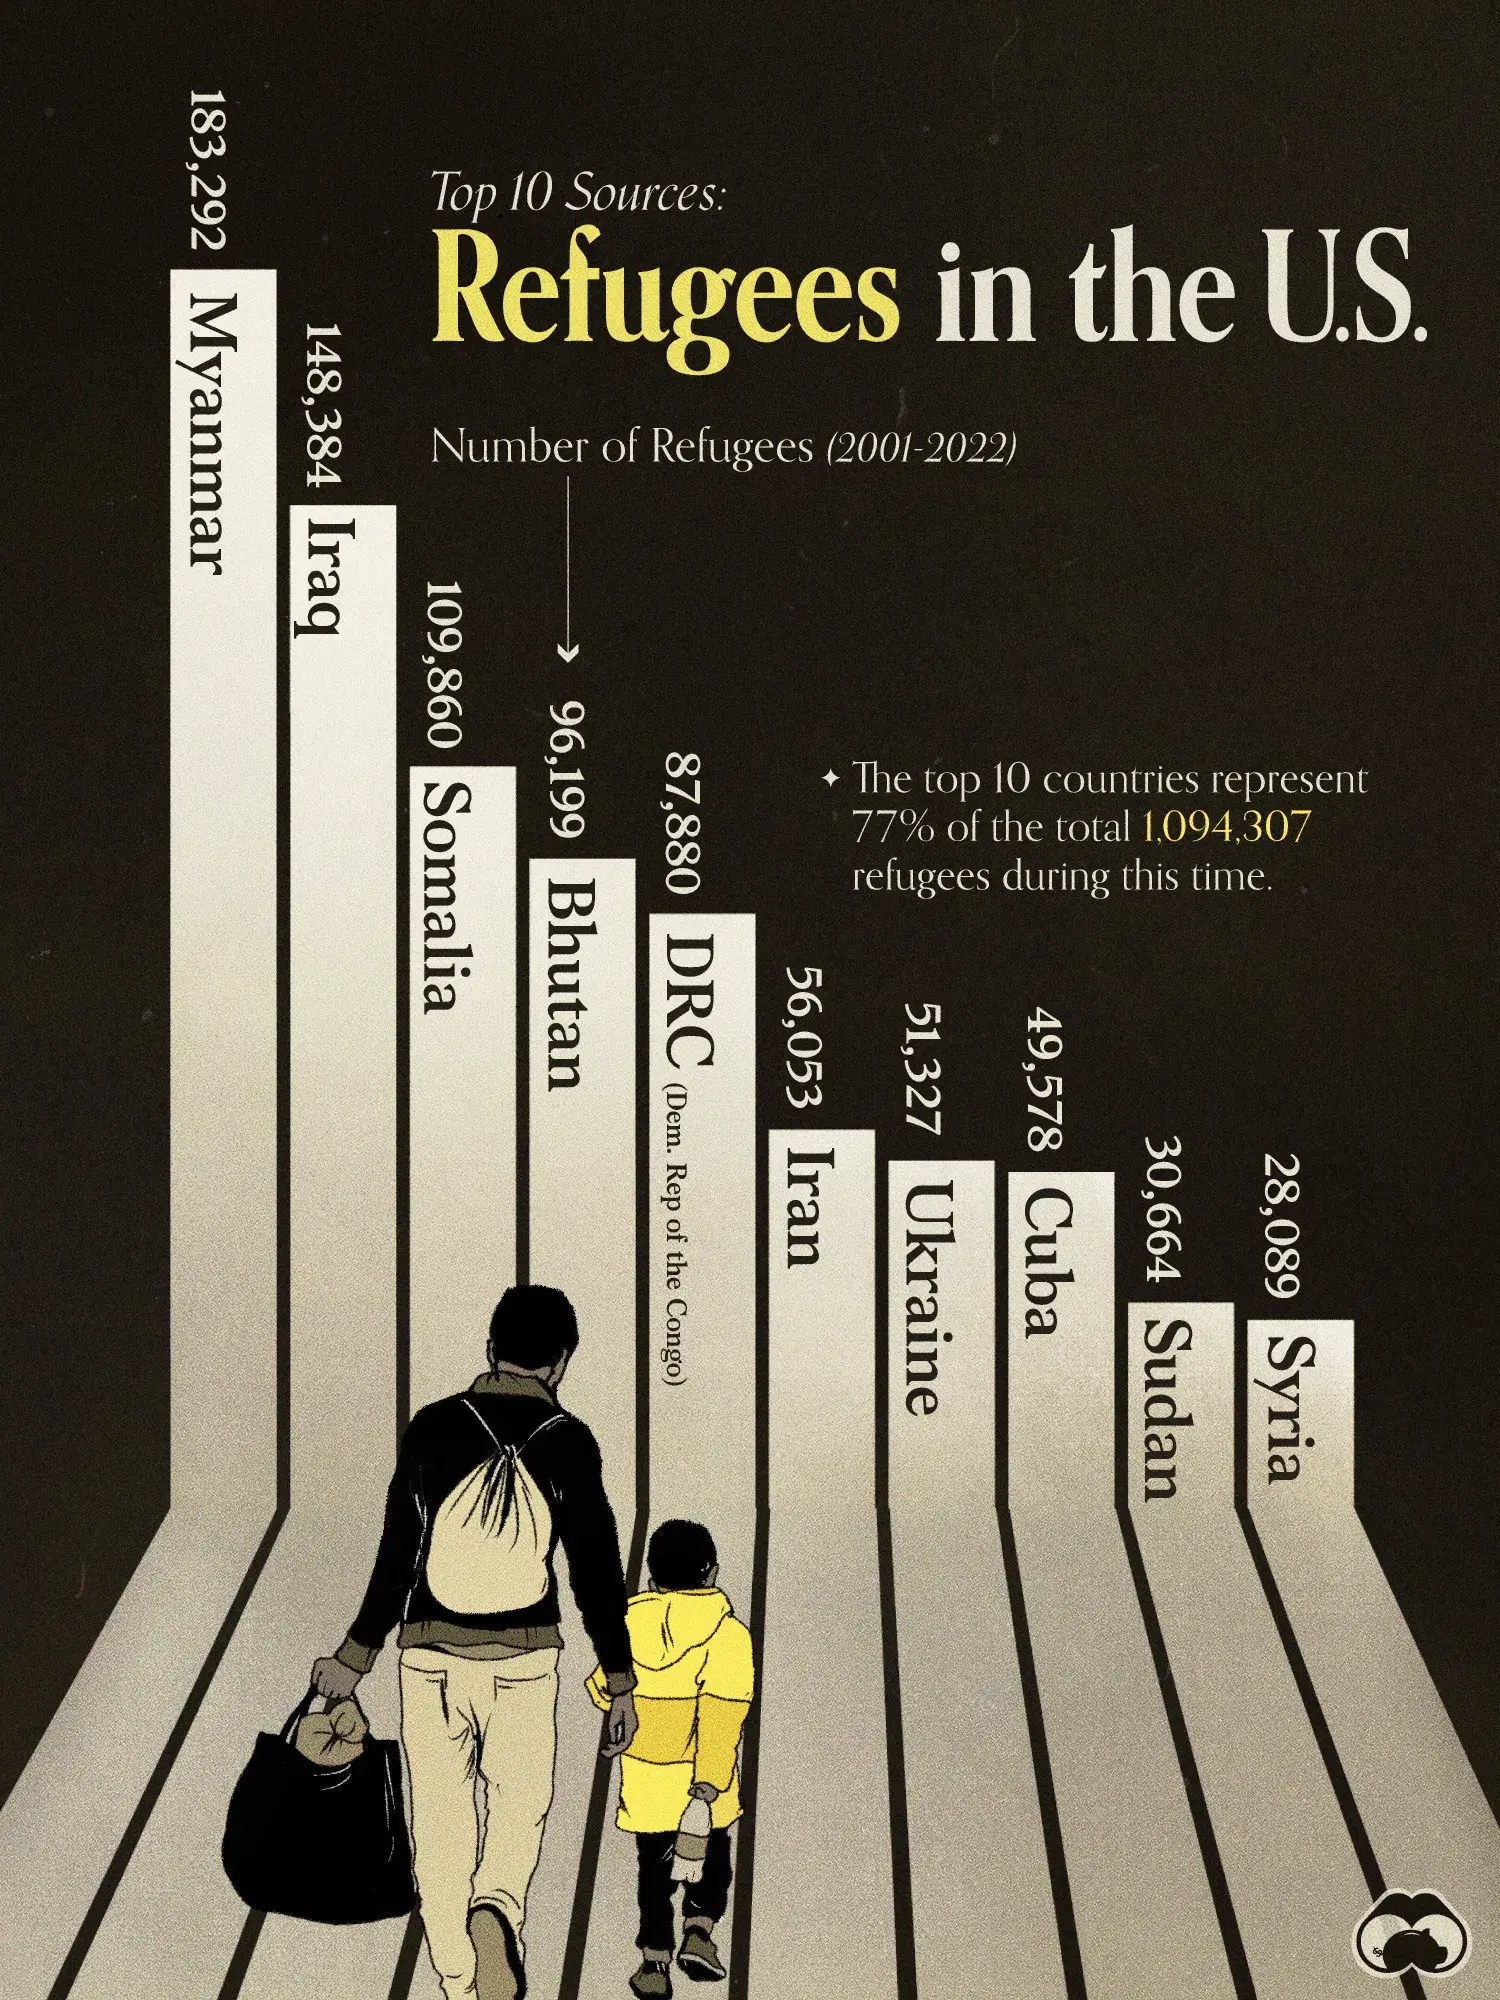 Myanmar and Iraq Are the Top Sources of Refugees in the U.S.